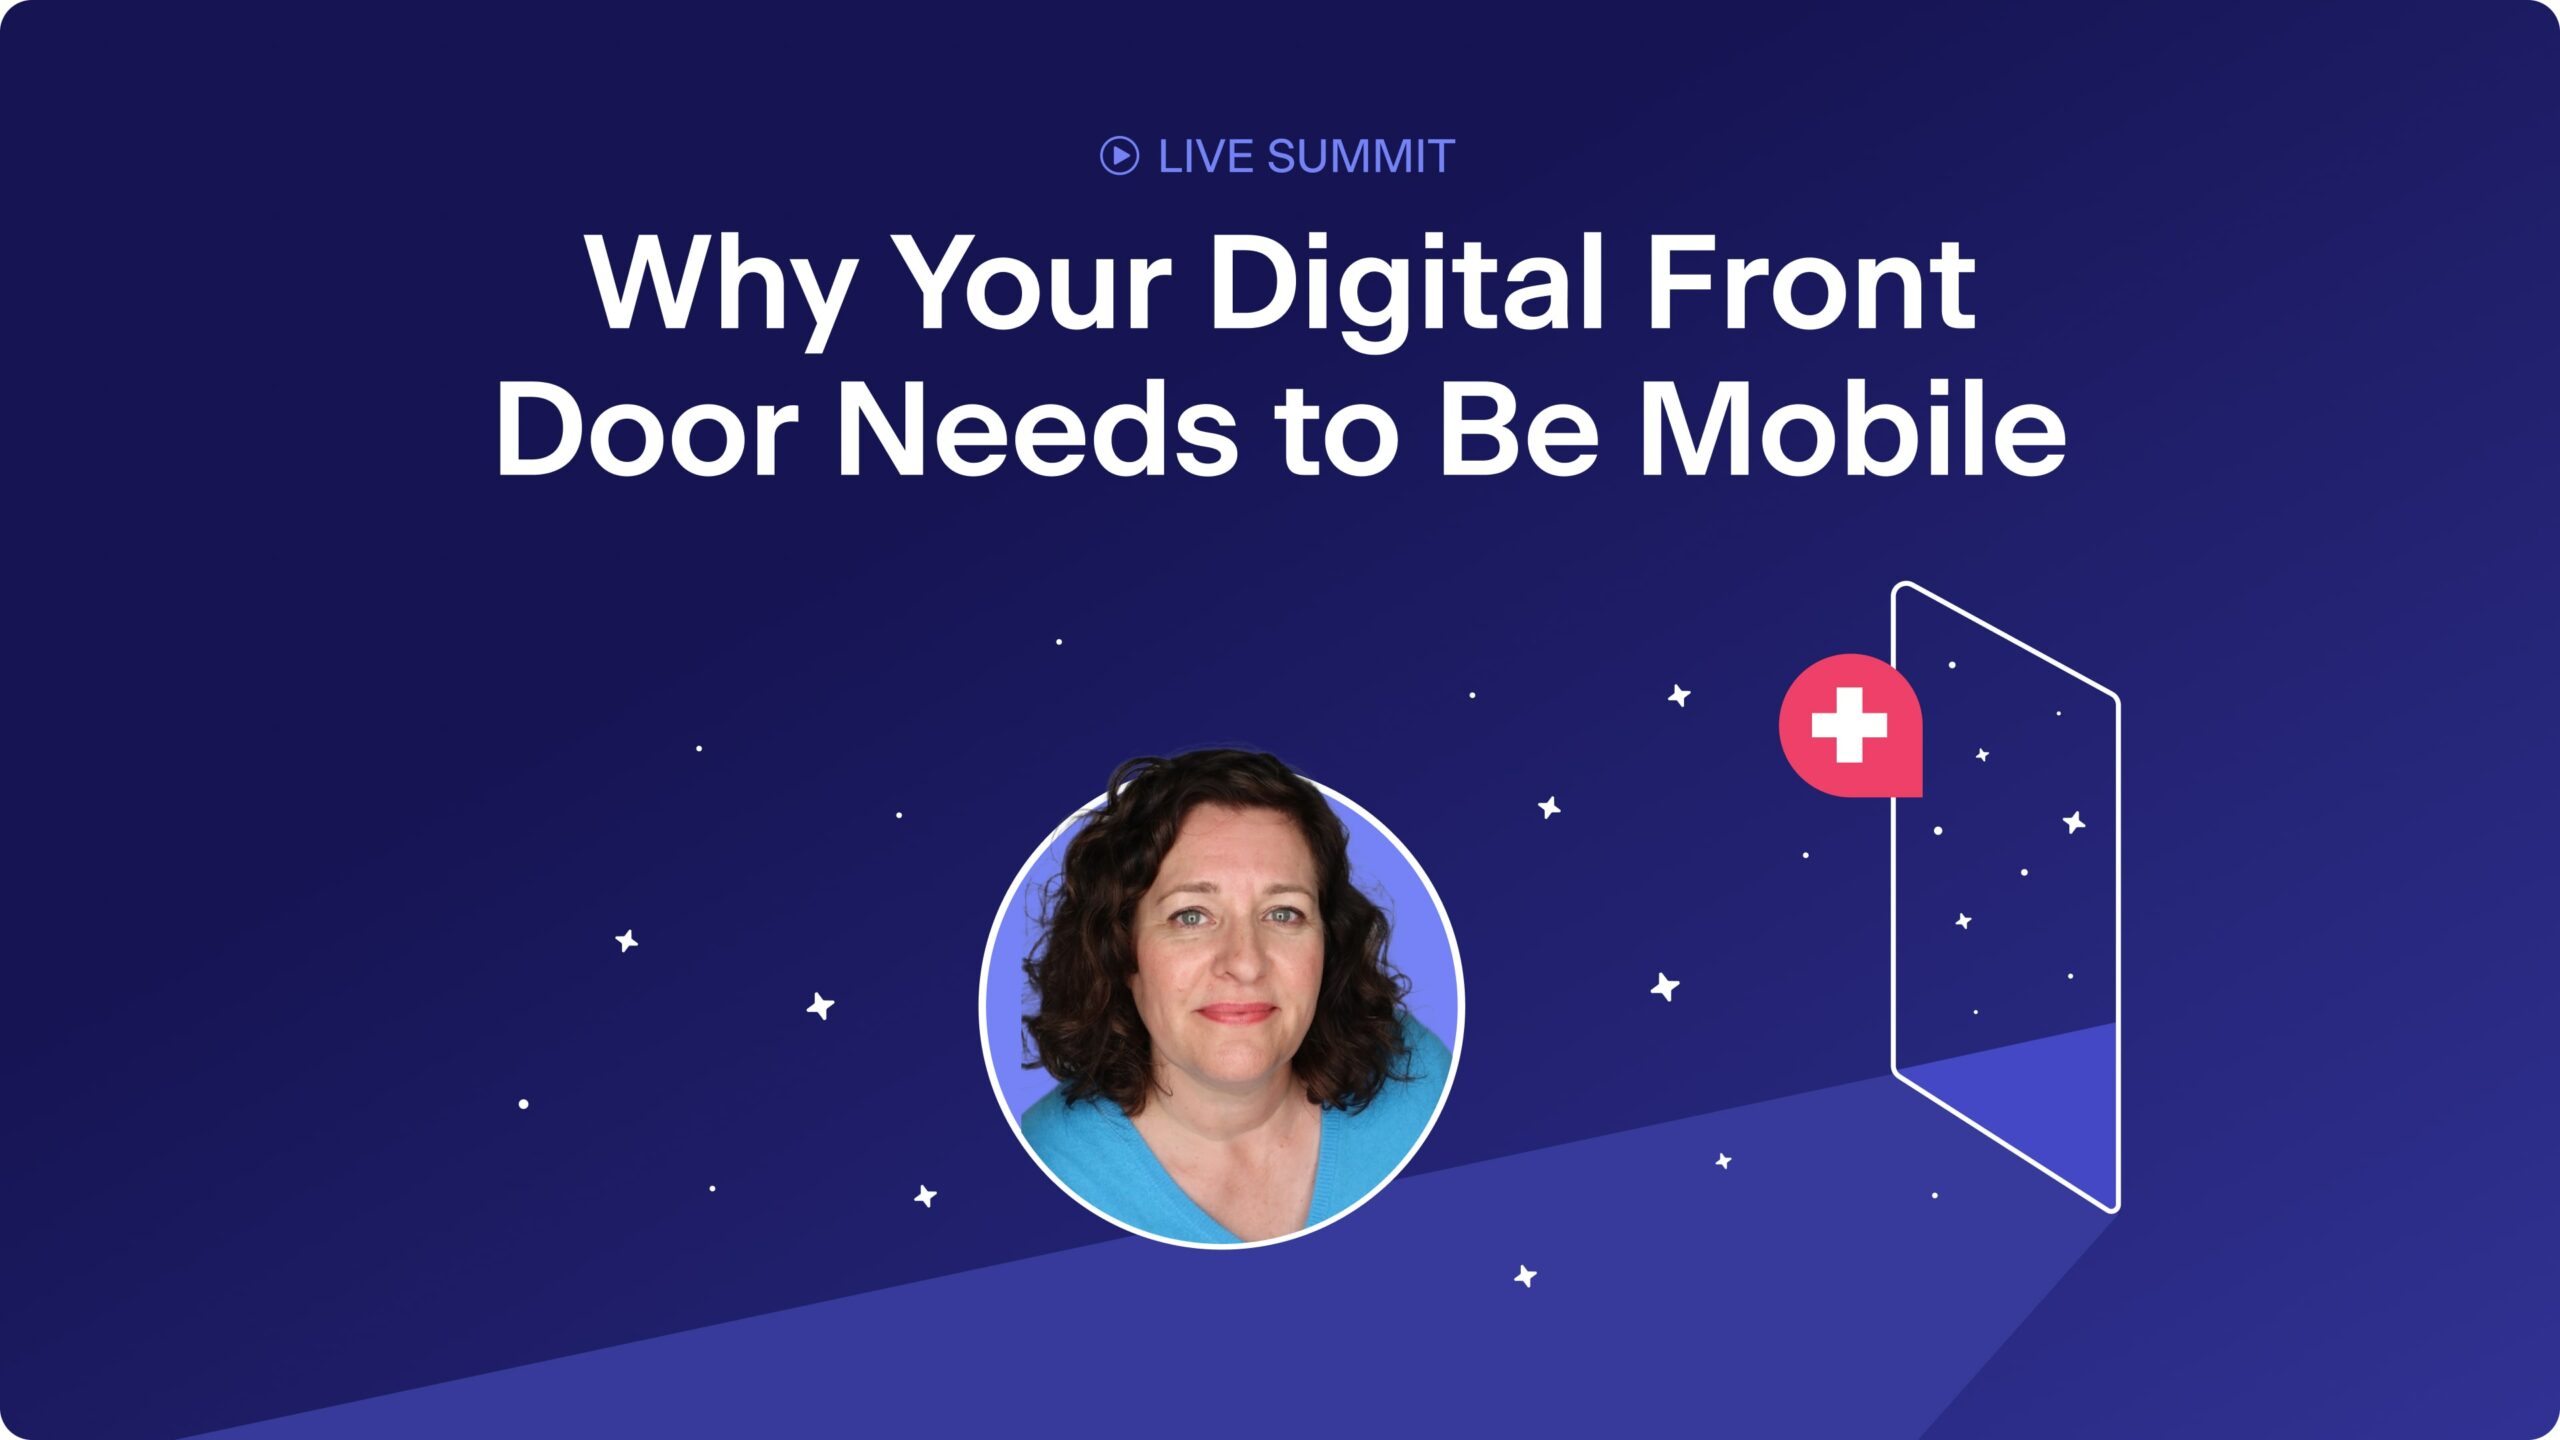 Why Your Digital Front Door Needs to Be Mobile